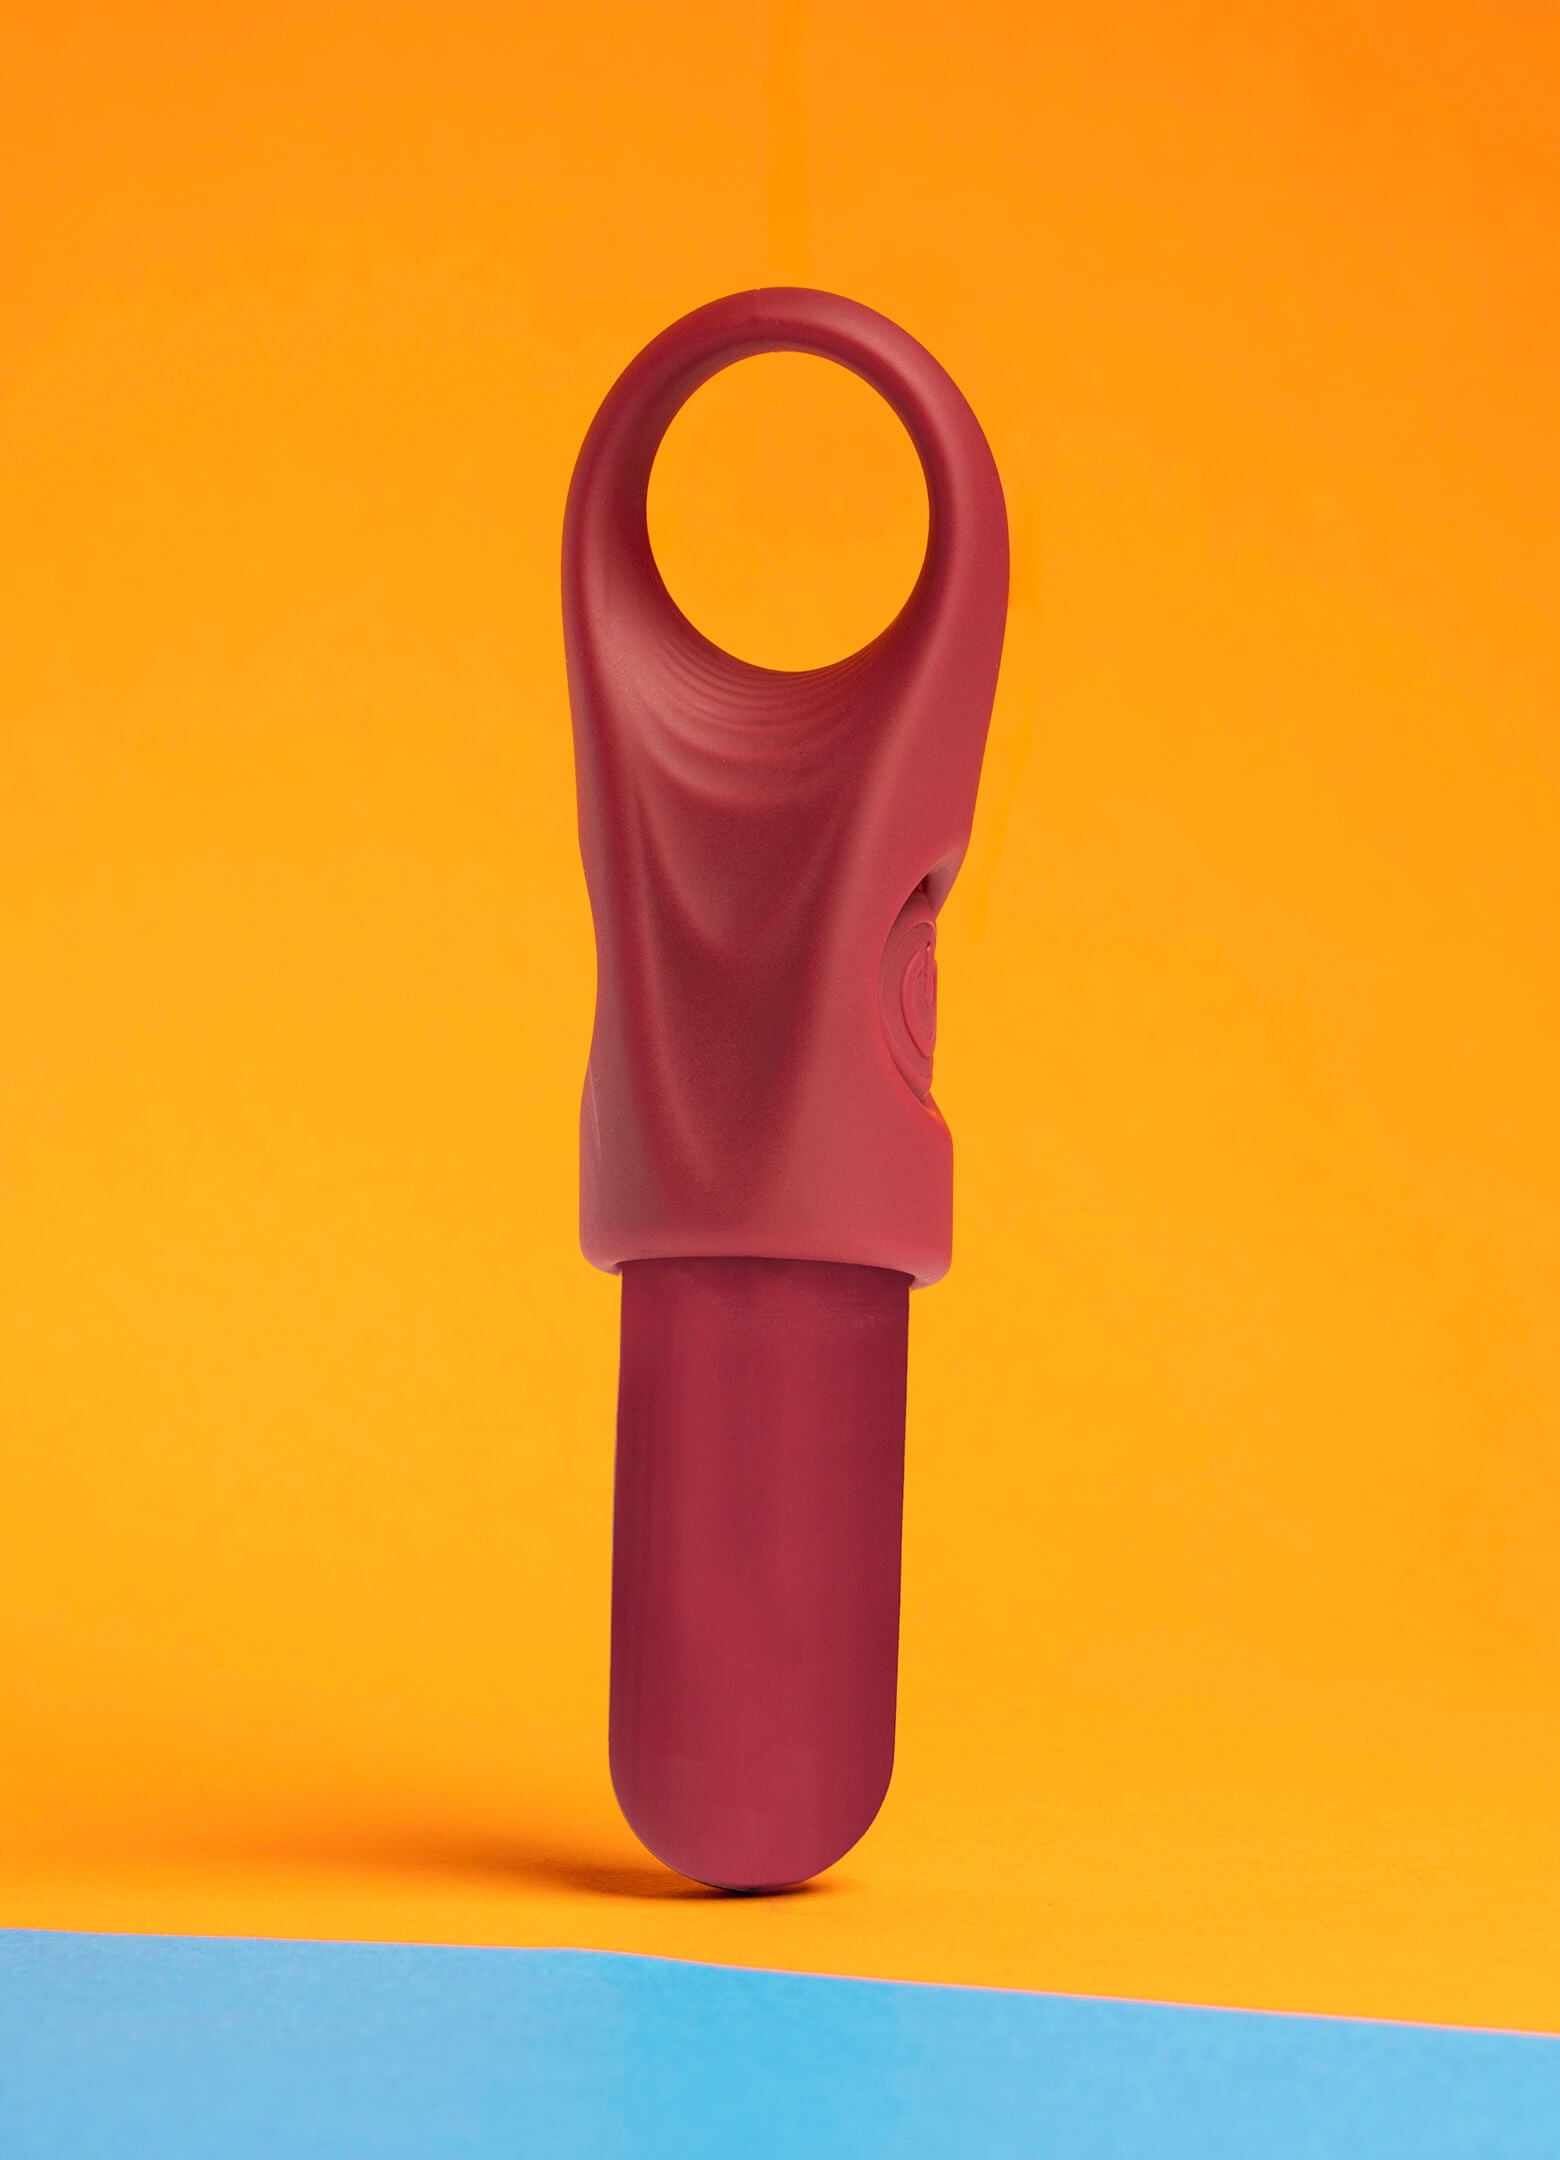 Ergonomic and accessible finger vibrator in burgundy housing a removable bullet vibrator.